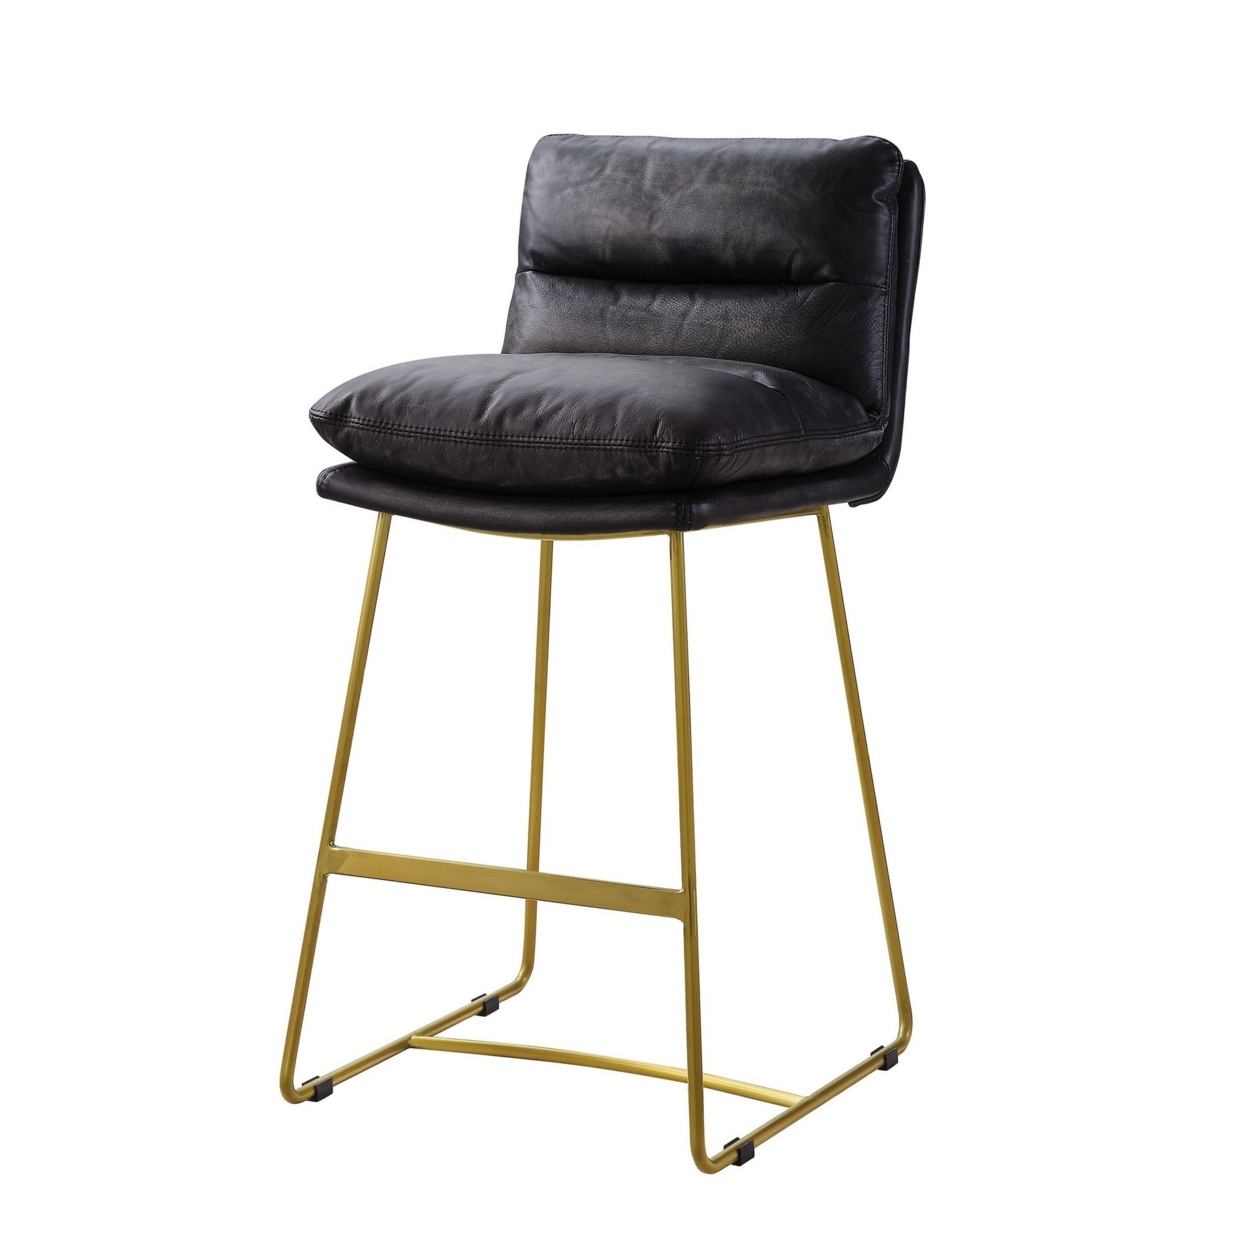 Leatherette Counter Height Chair With Metal Sled Base, Black And Gold- Saltoro Sherpi